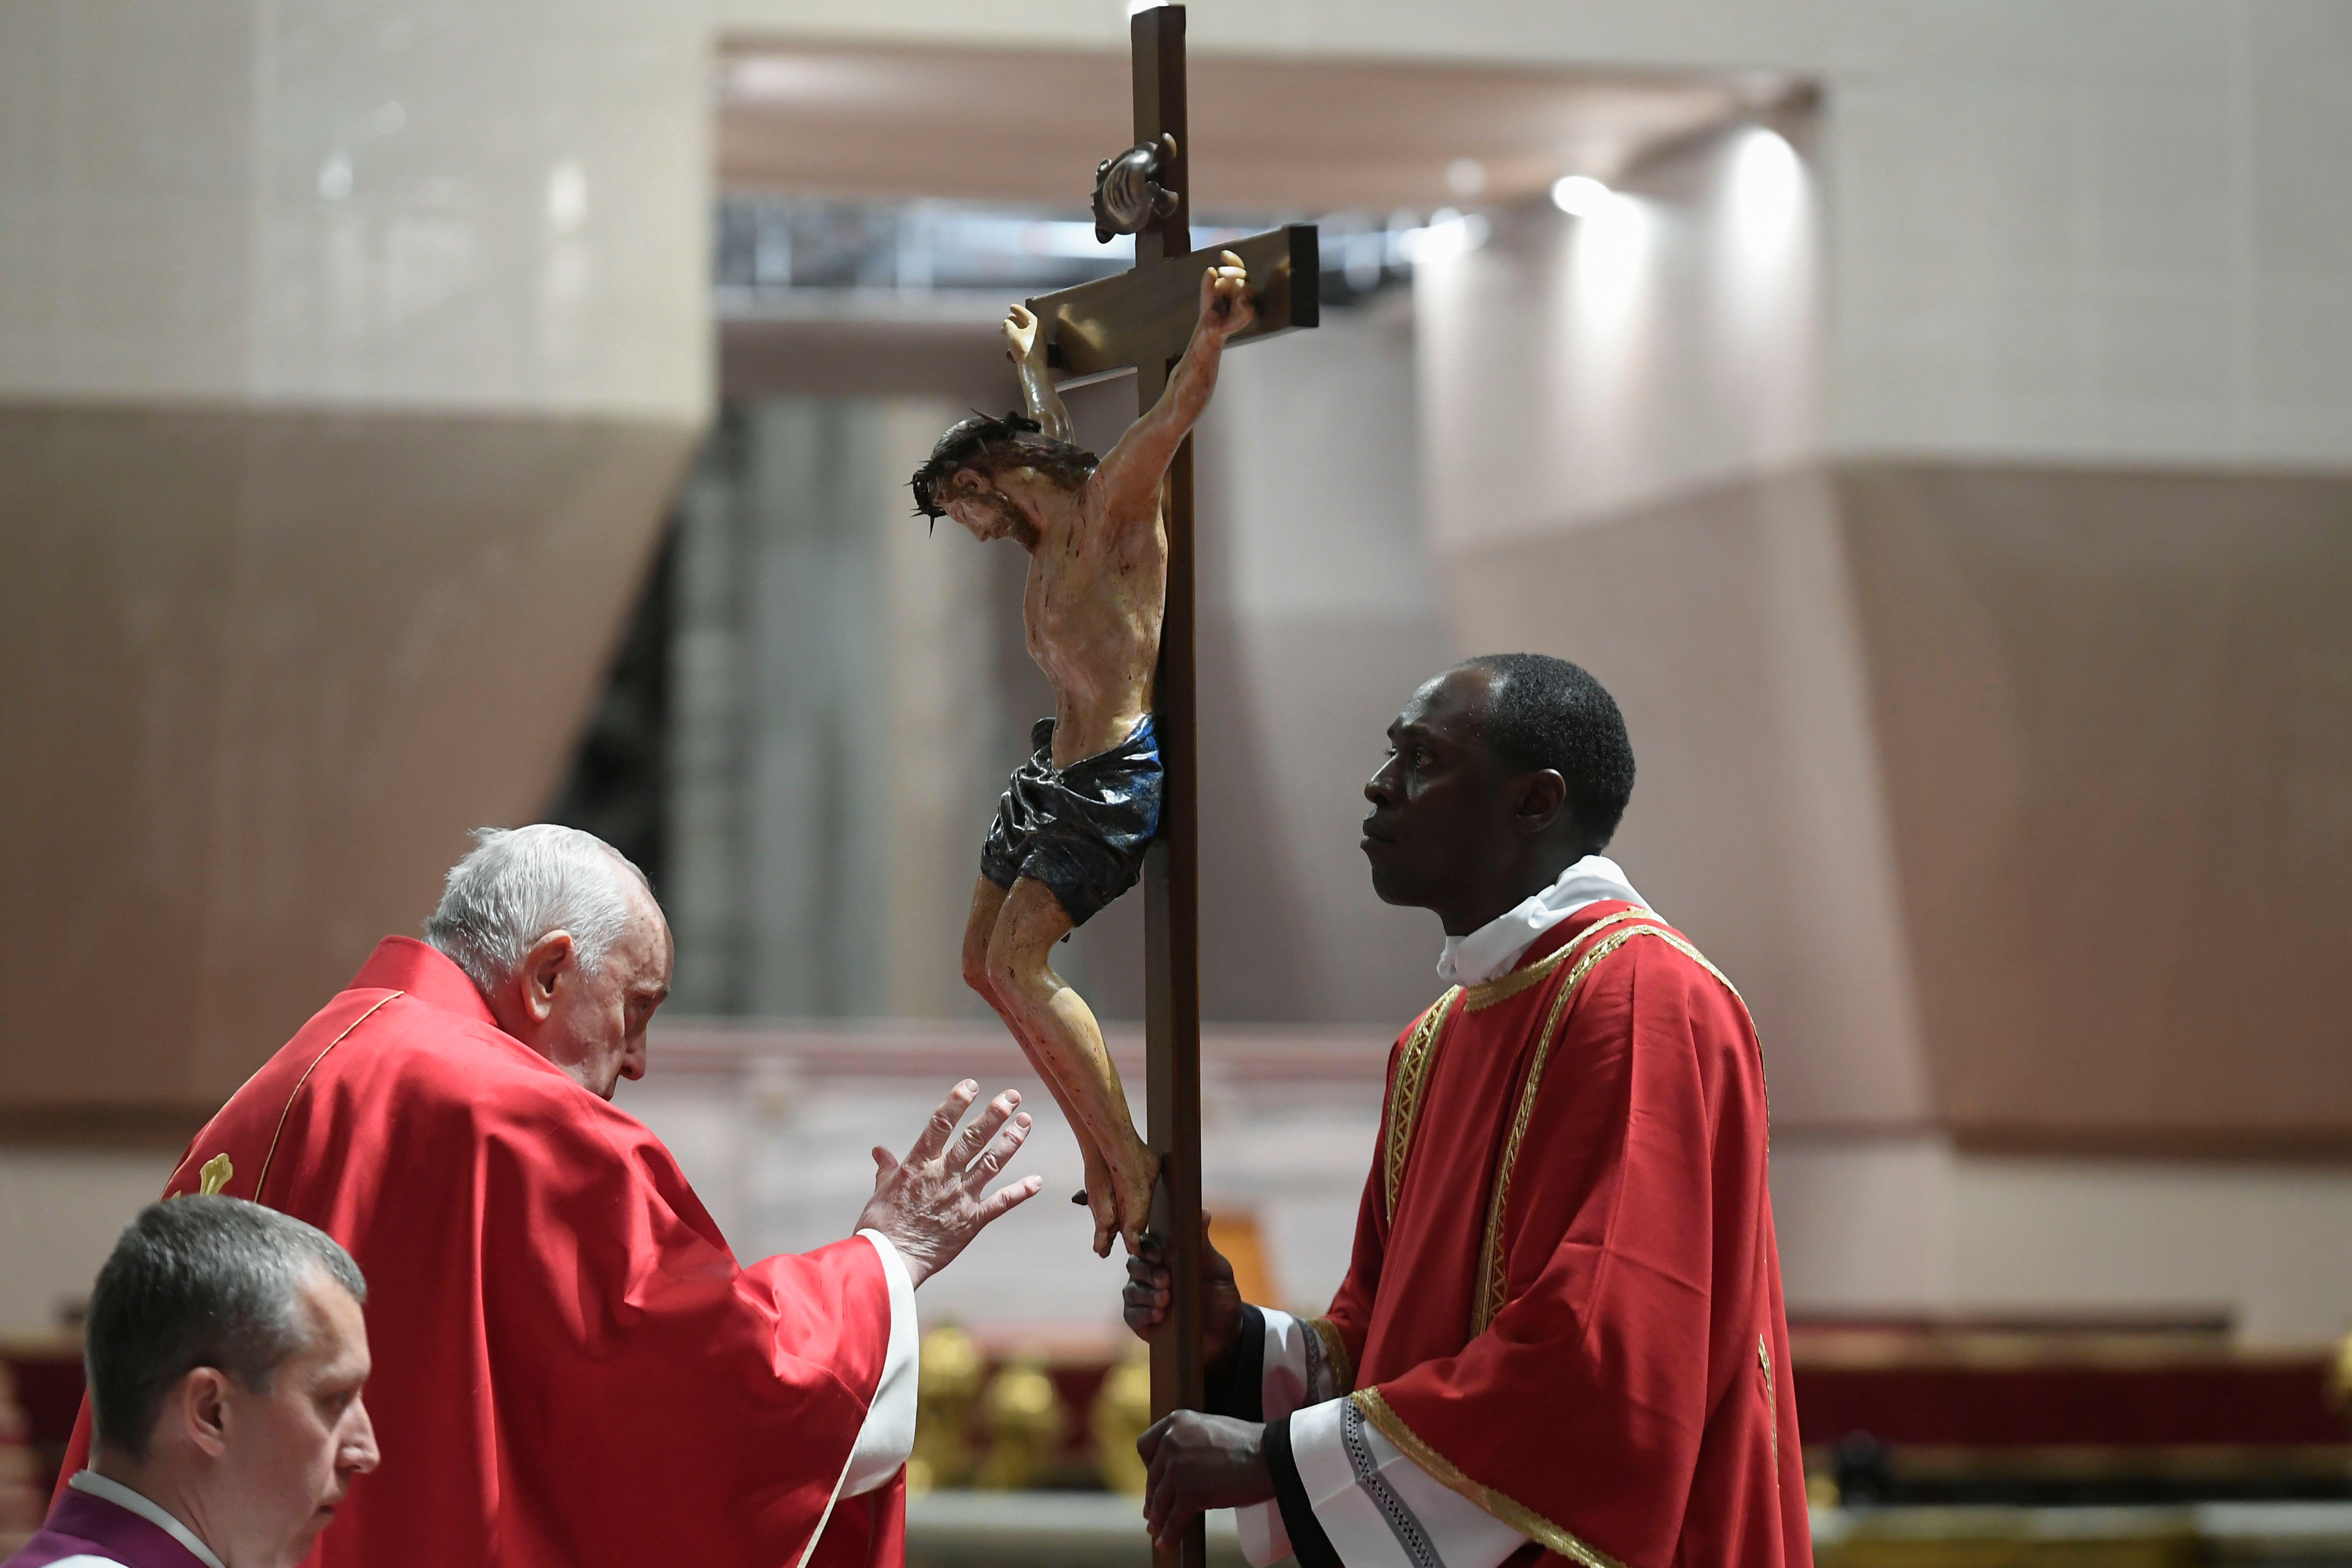 Pope steps back from Via Crucis to safeguard health